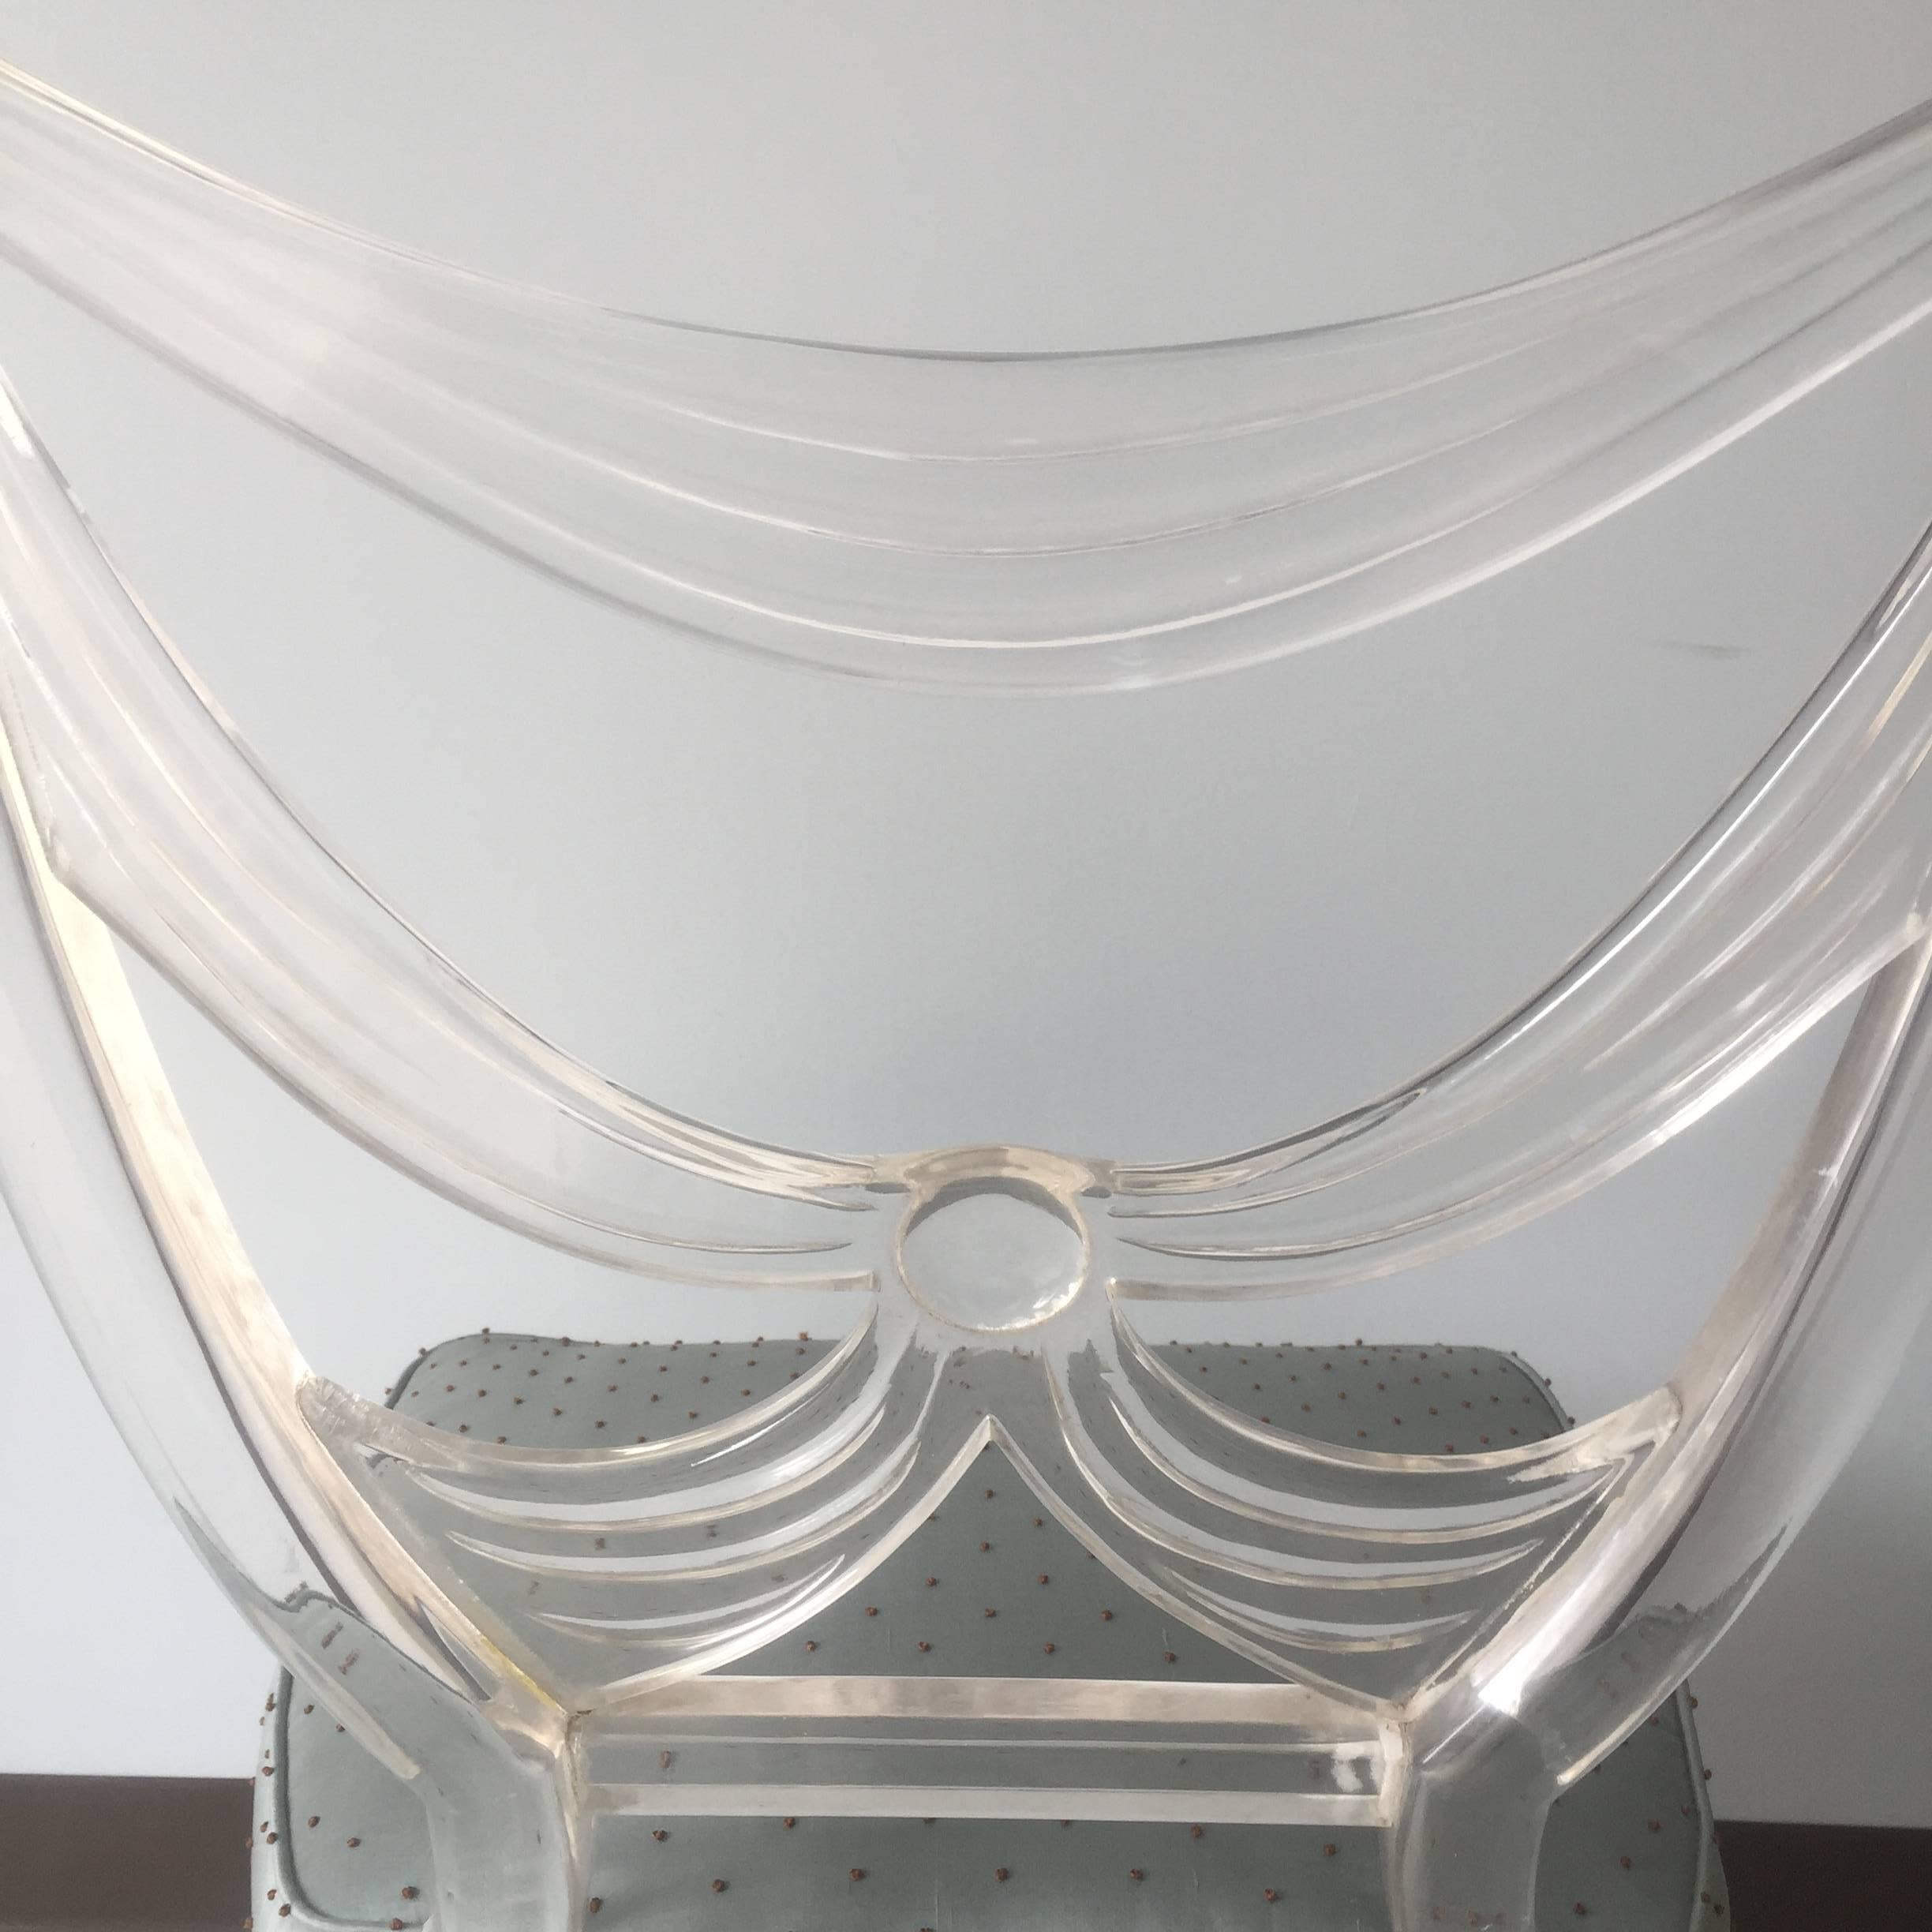 Mid-20th Century Rare Lucite Chair by Lorin Jackson for Grosfeld House, circa 1939